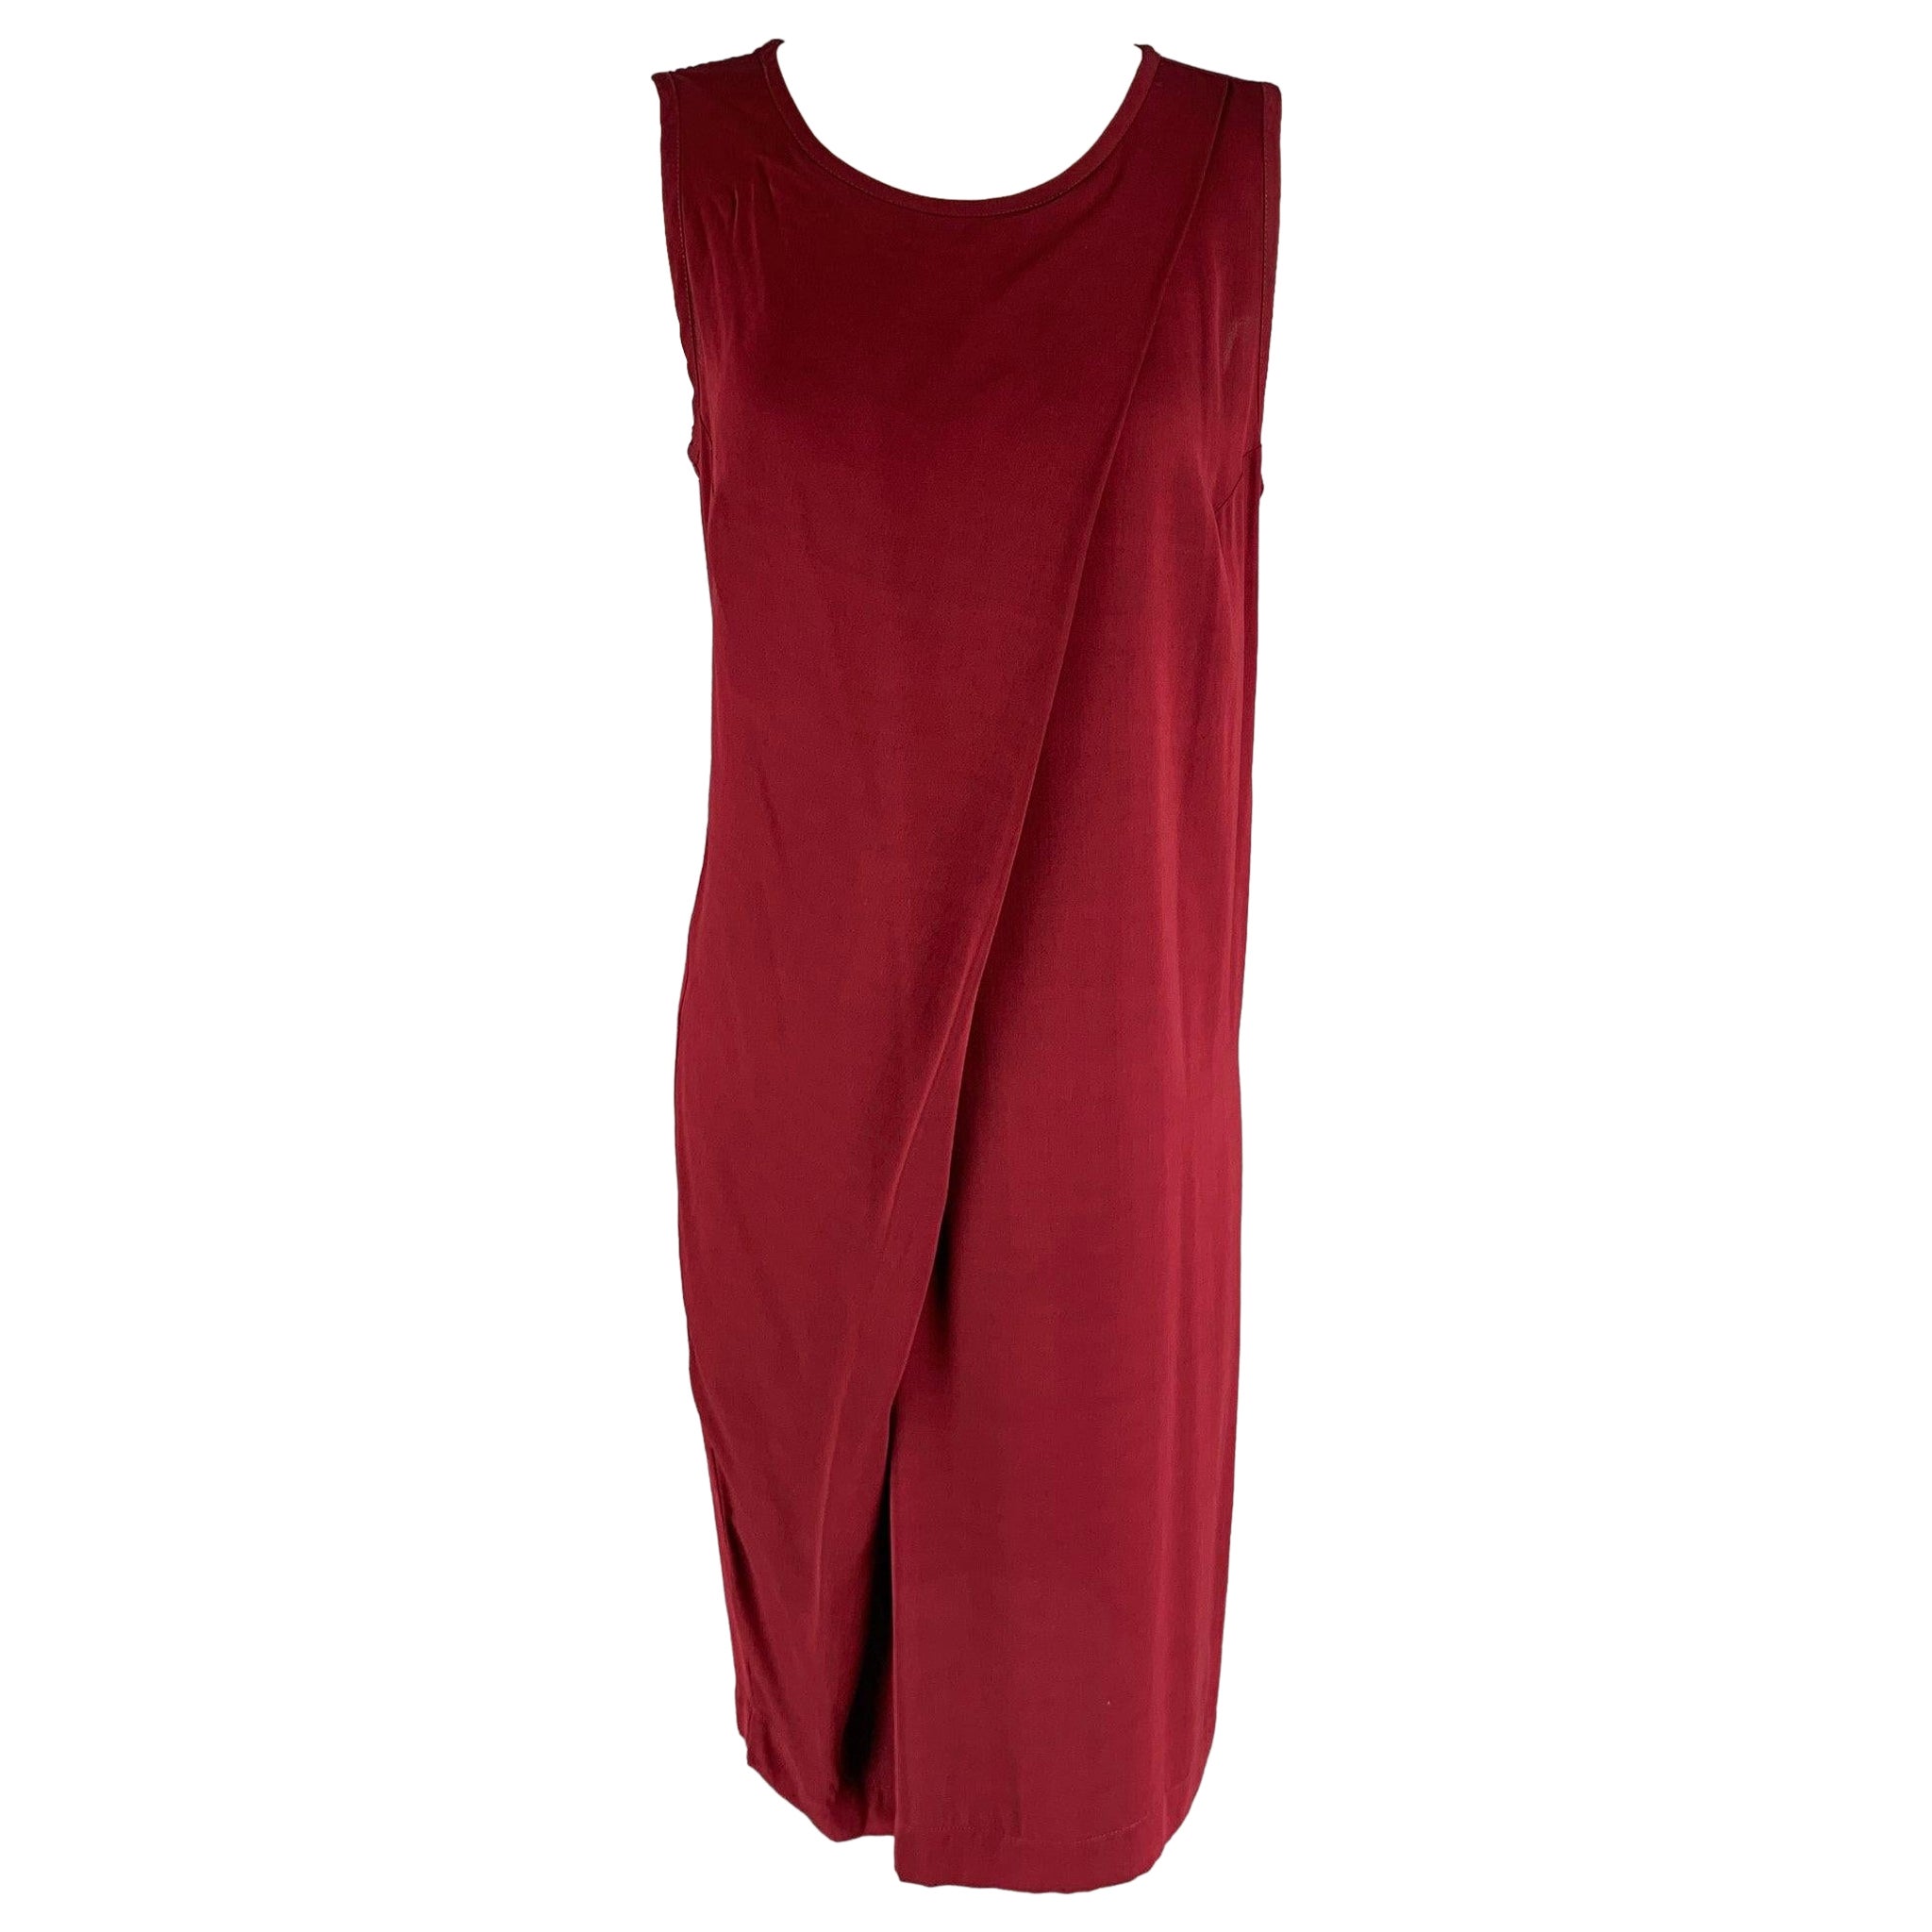 ANN DEMEULEMEESTER Size 4 Burgundy Rayon Solid Dress For Sale